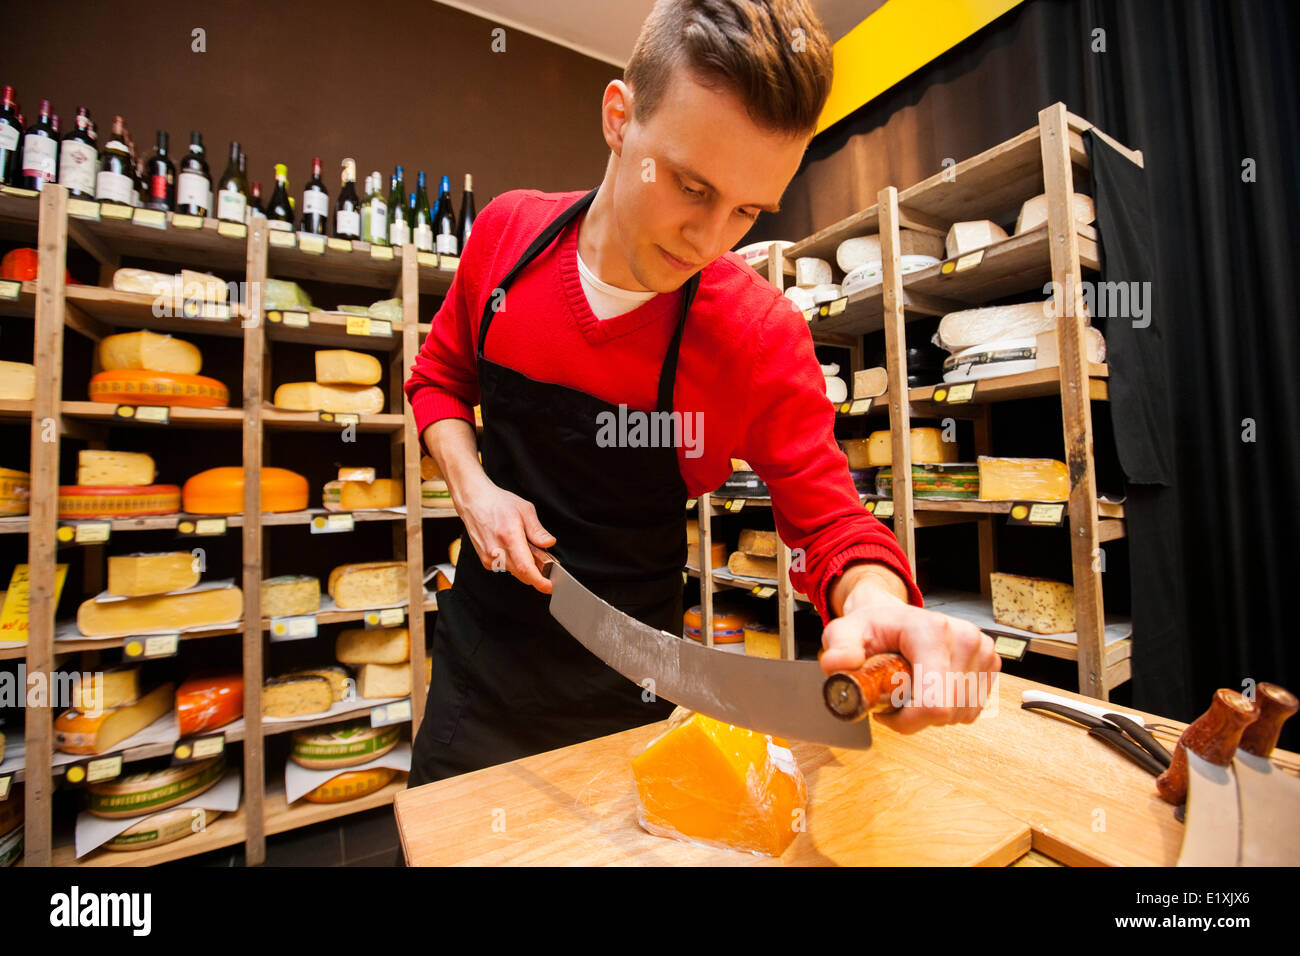 Male salesperson cutting cheese in store Stock Photo